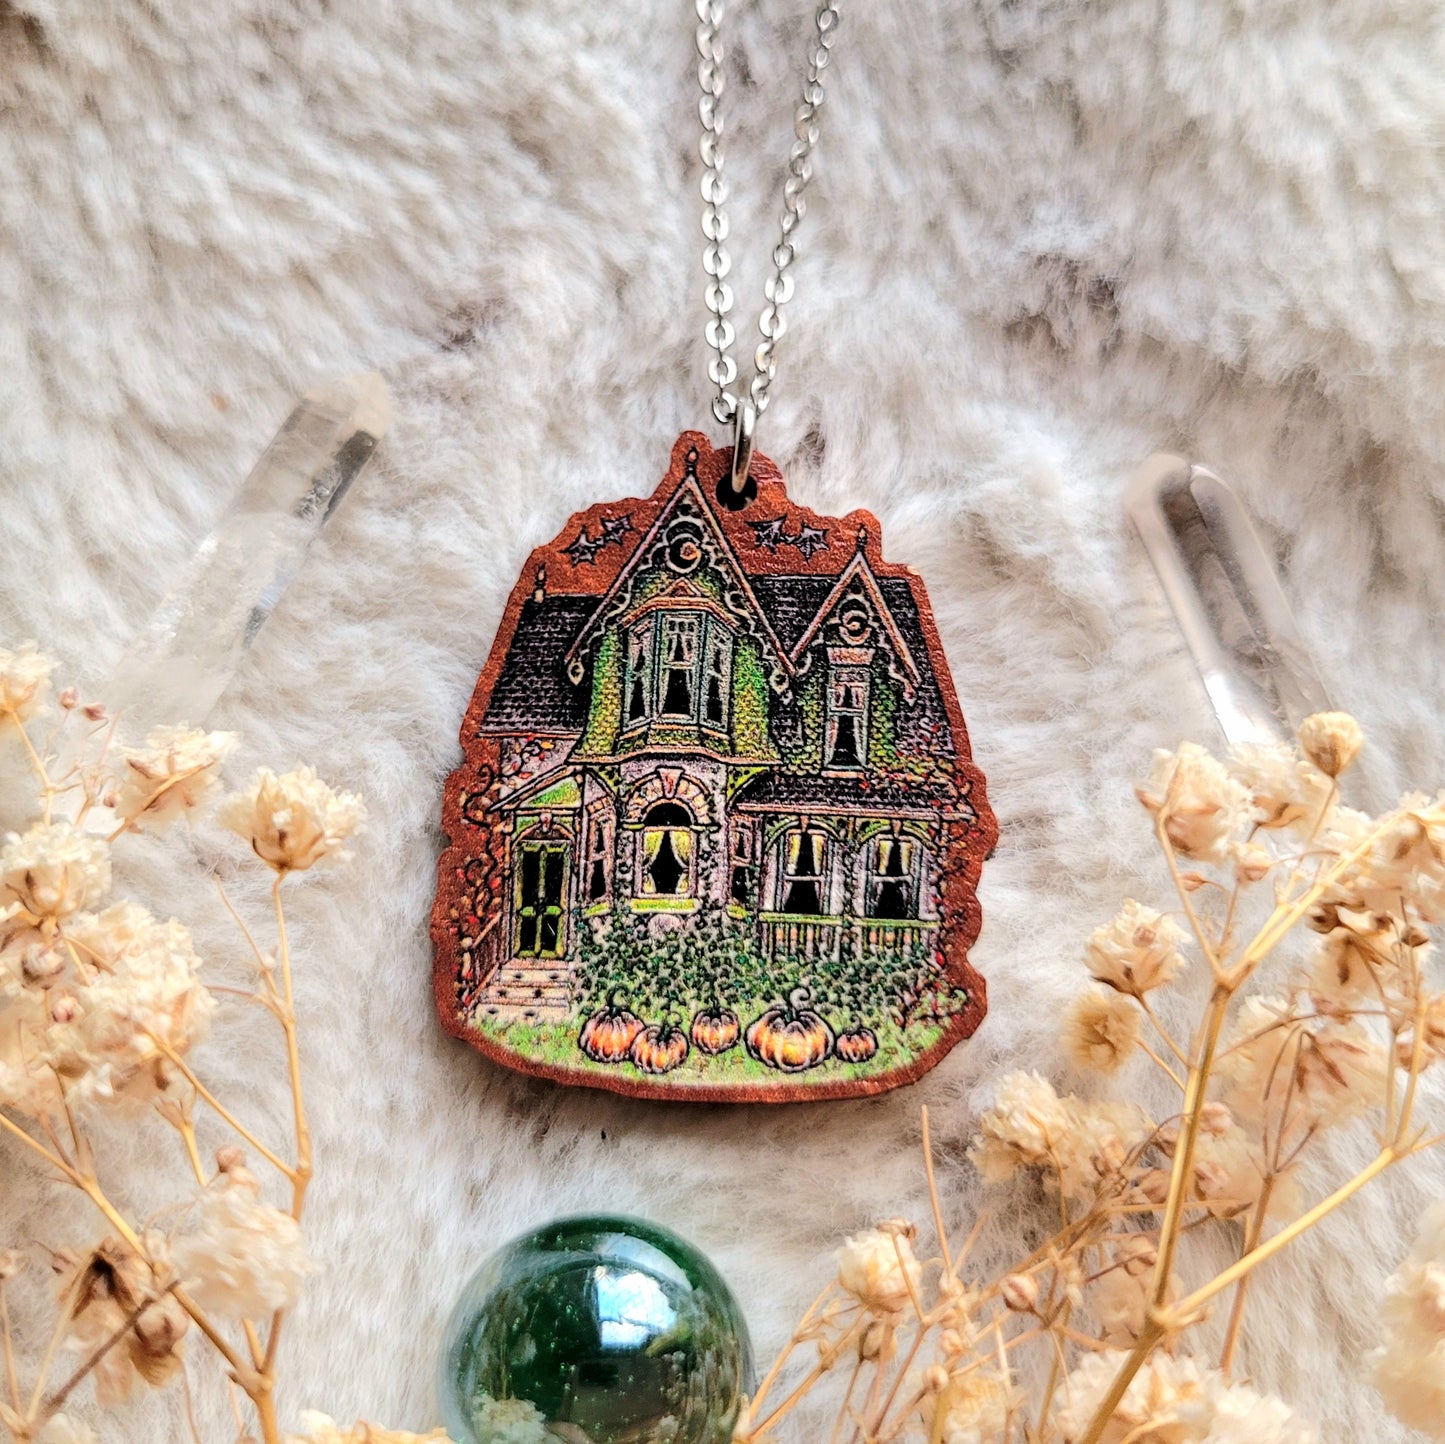 Fall House illustrated necklace, responsibly sourced cherry wood, chain options available, by Grace Moth